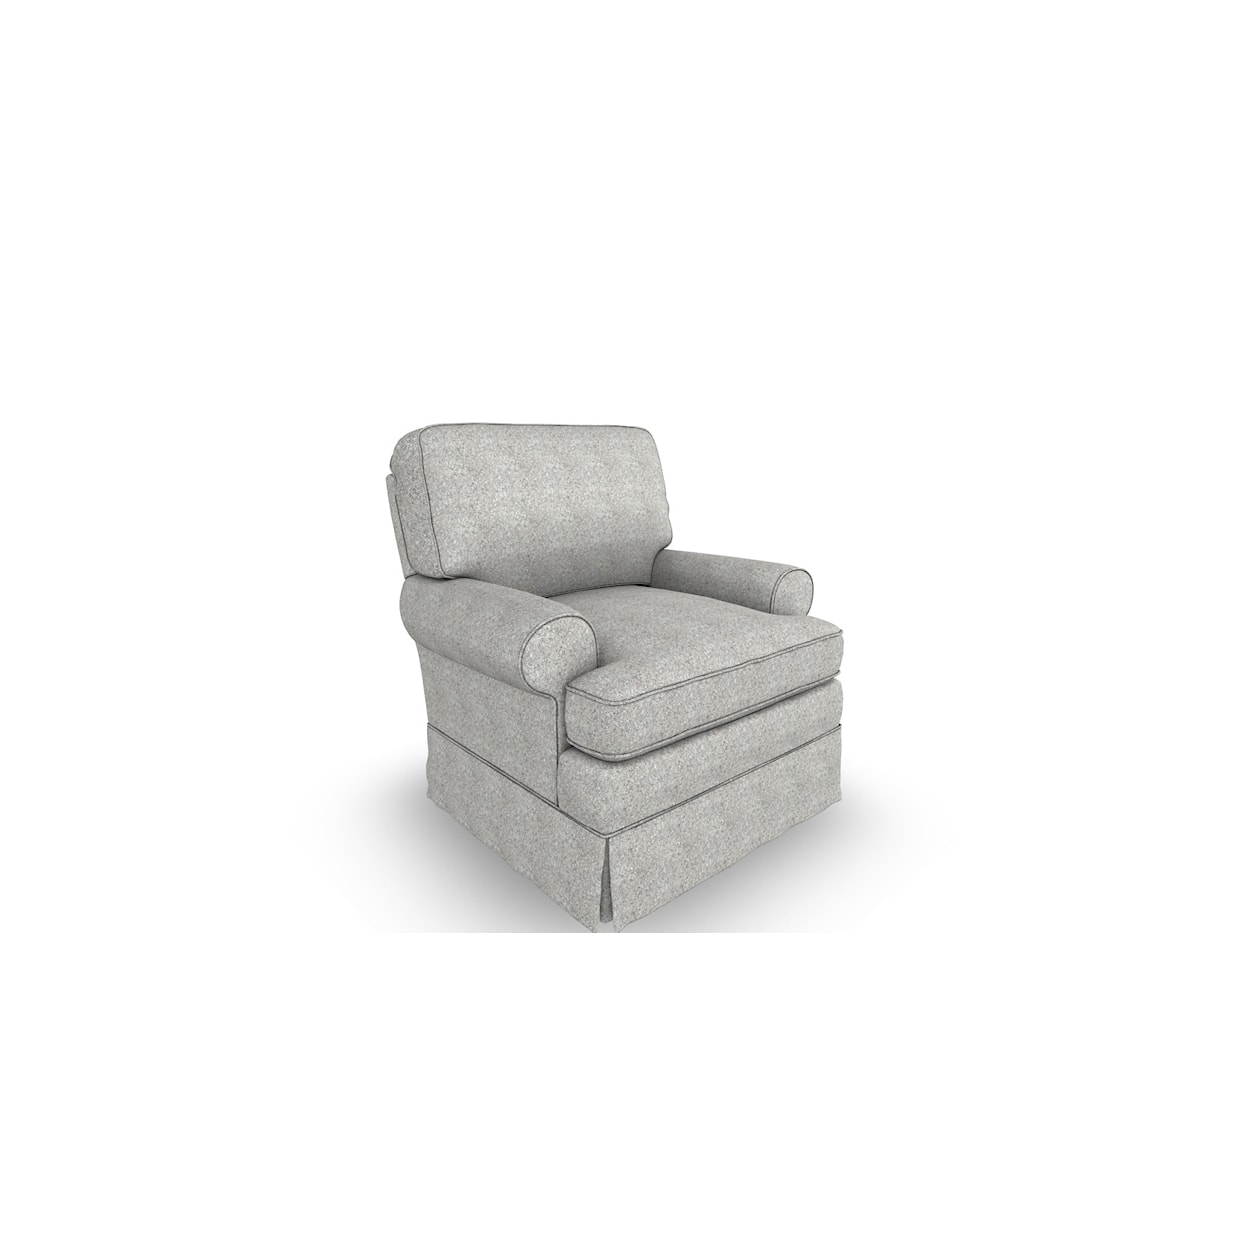 Best Home Furnishings Quinn Swivel Glider Chair with Welt Cord Trim